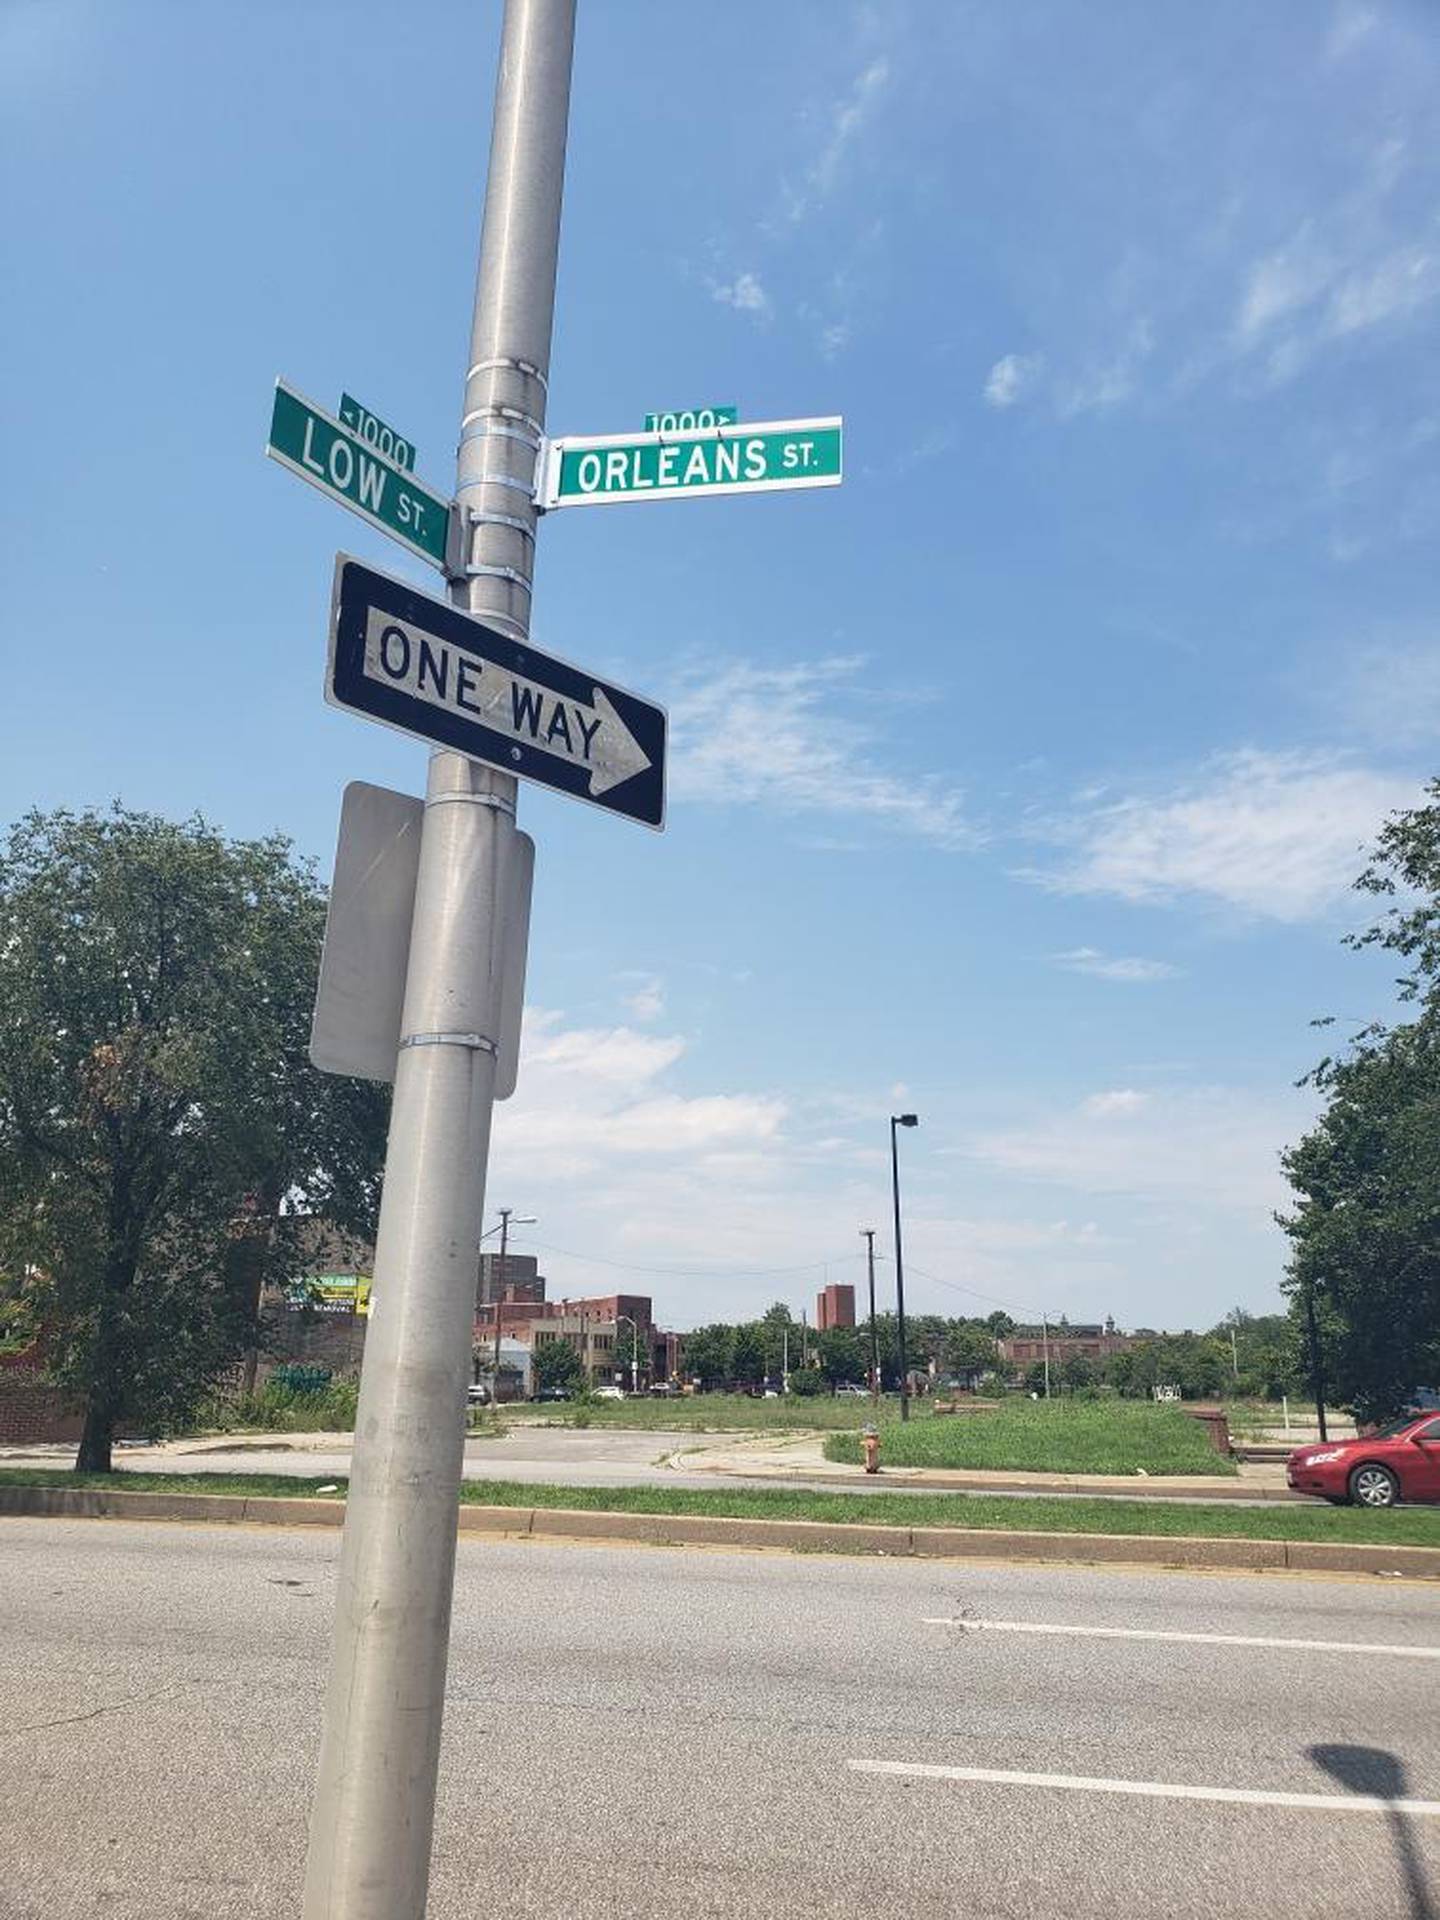 By Thursday afternoon, the city's transportation department had fixed the Orleans Street sign with the correct spelling.